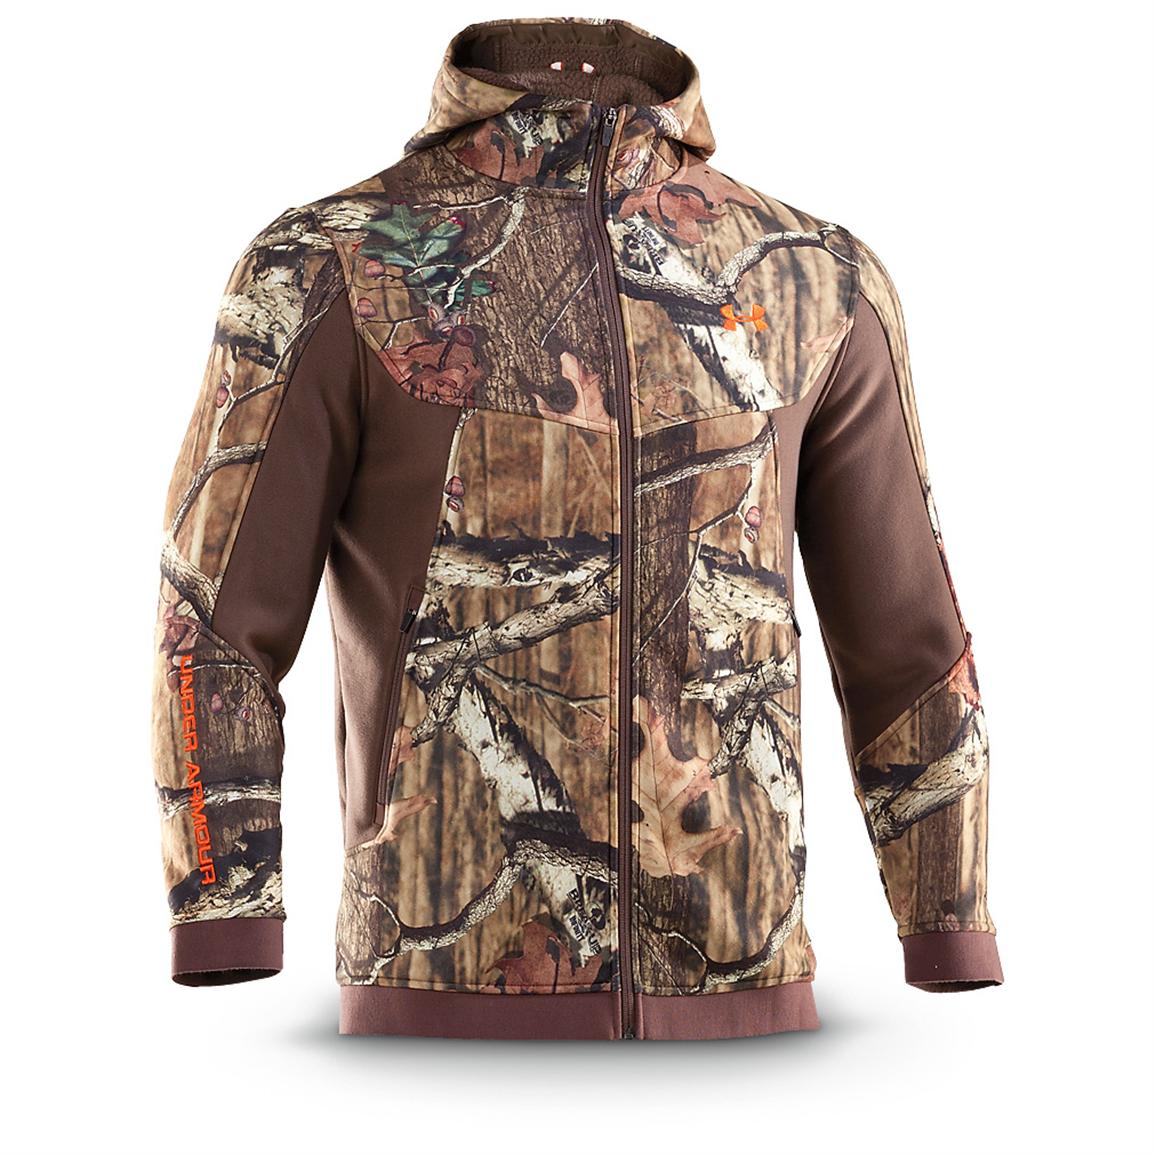 Cheap under armor realtree Buy Online 